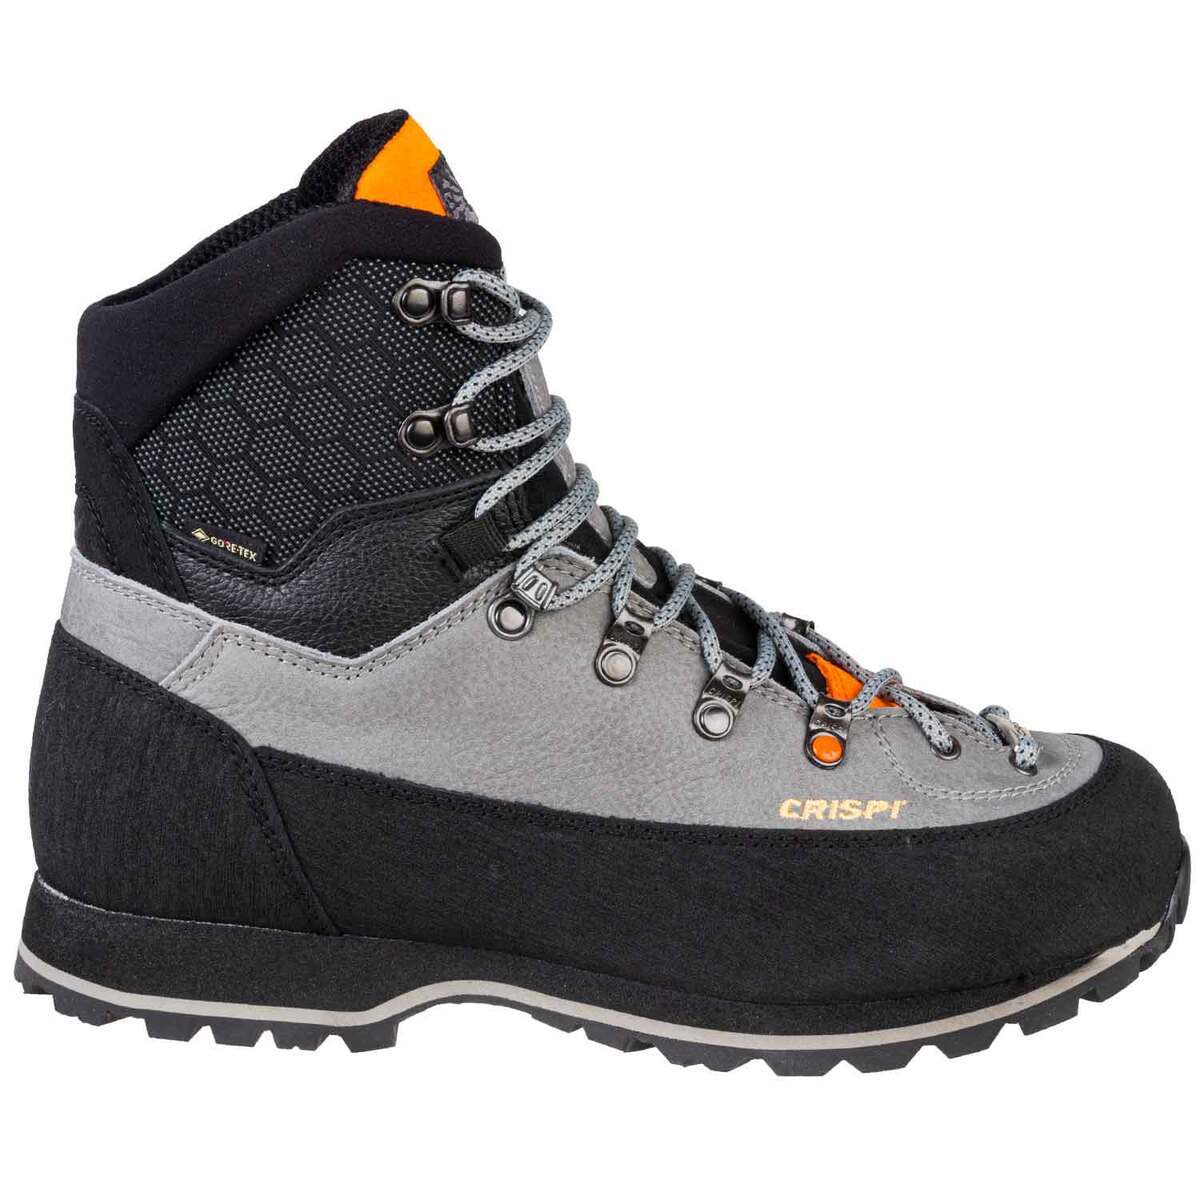 Crispi Men's Lapponia II GTX Hunting Lace Up Boots | Sportsman's Warehouse